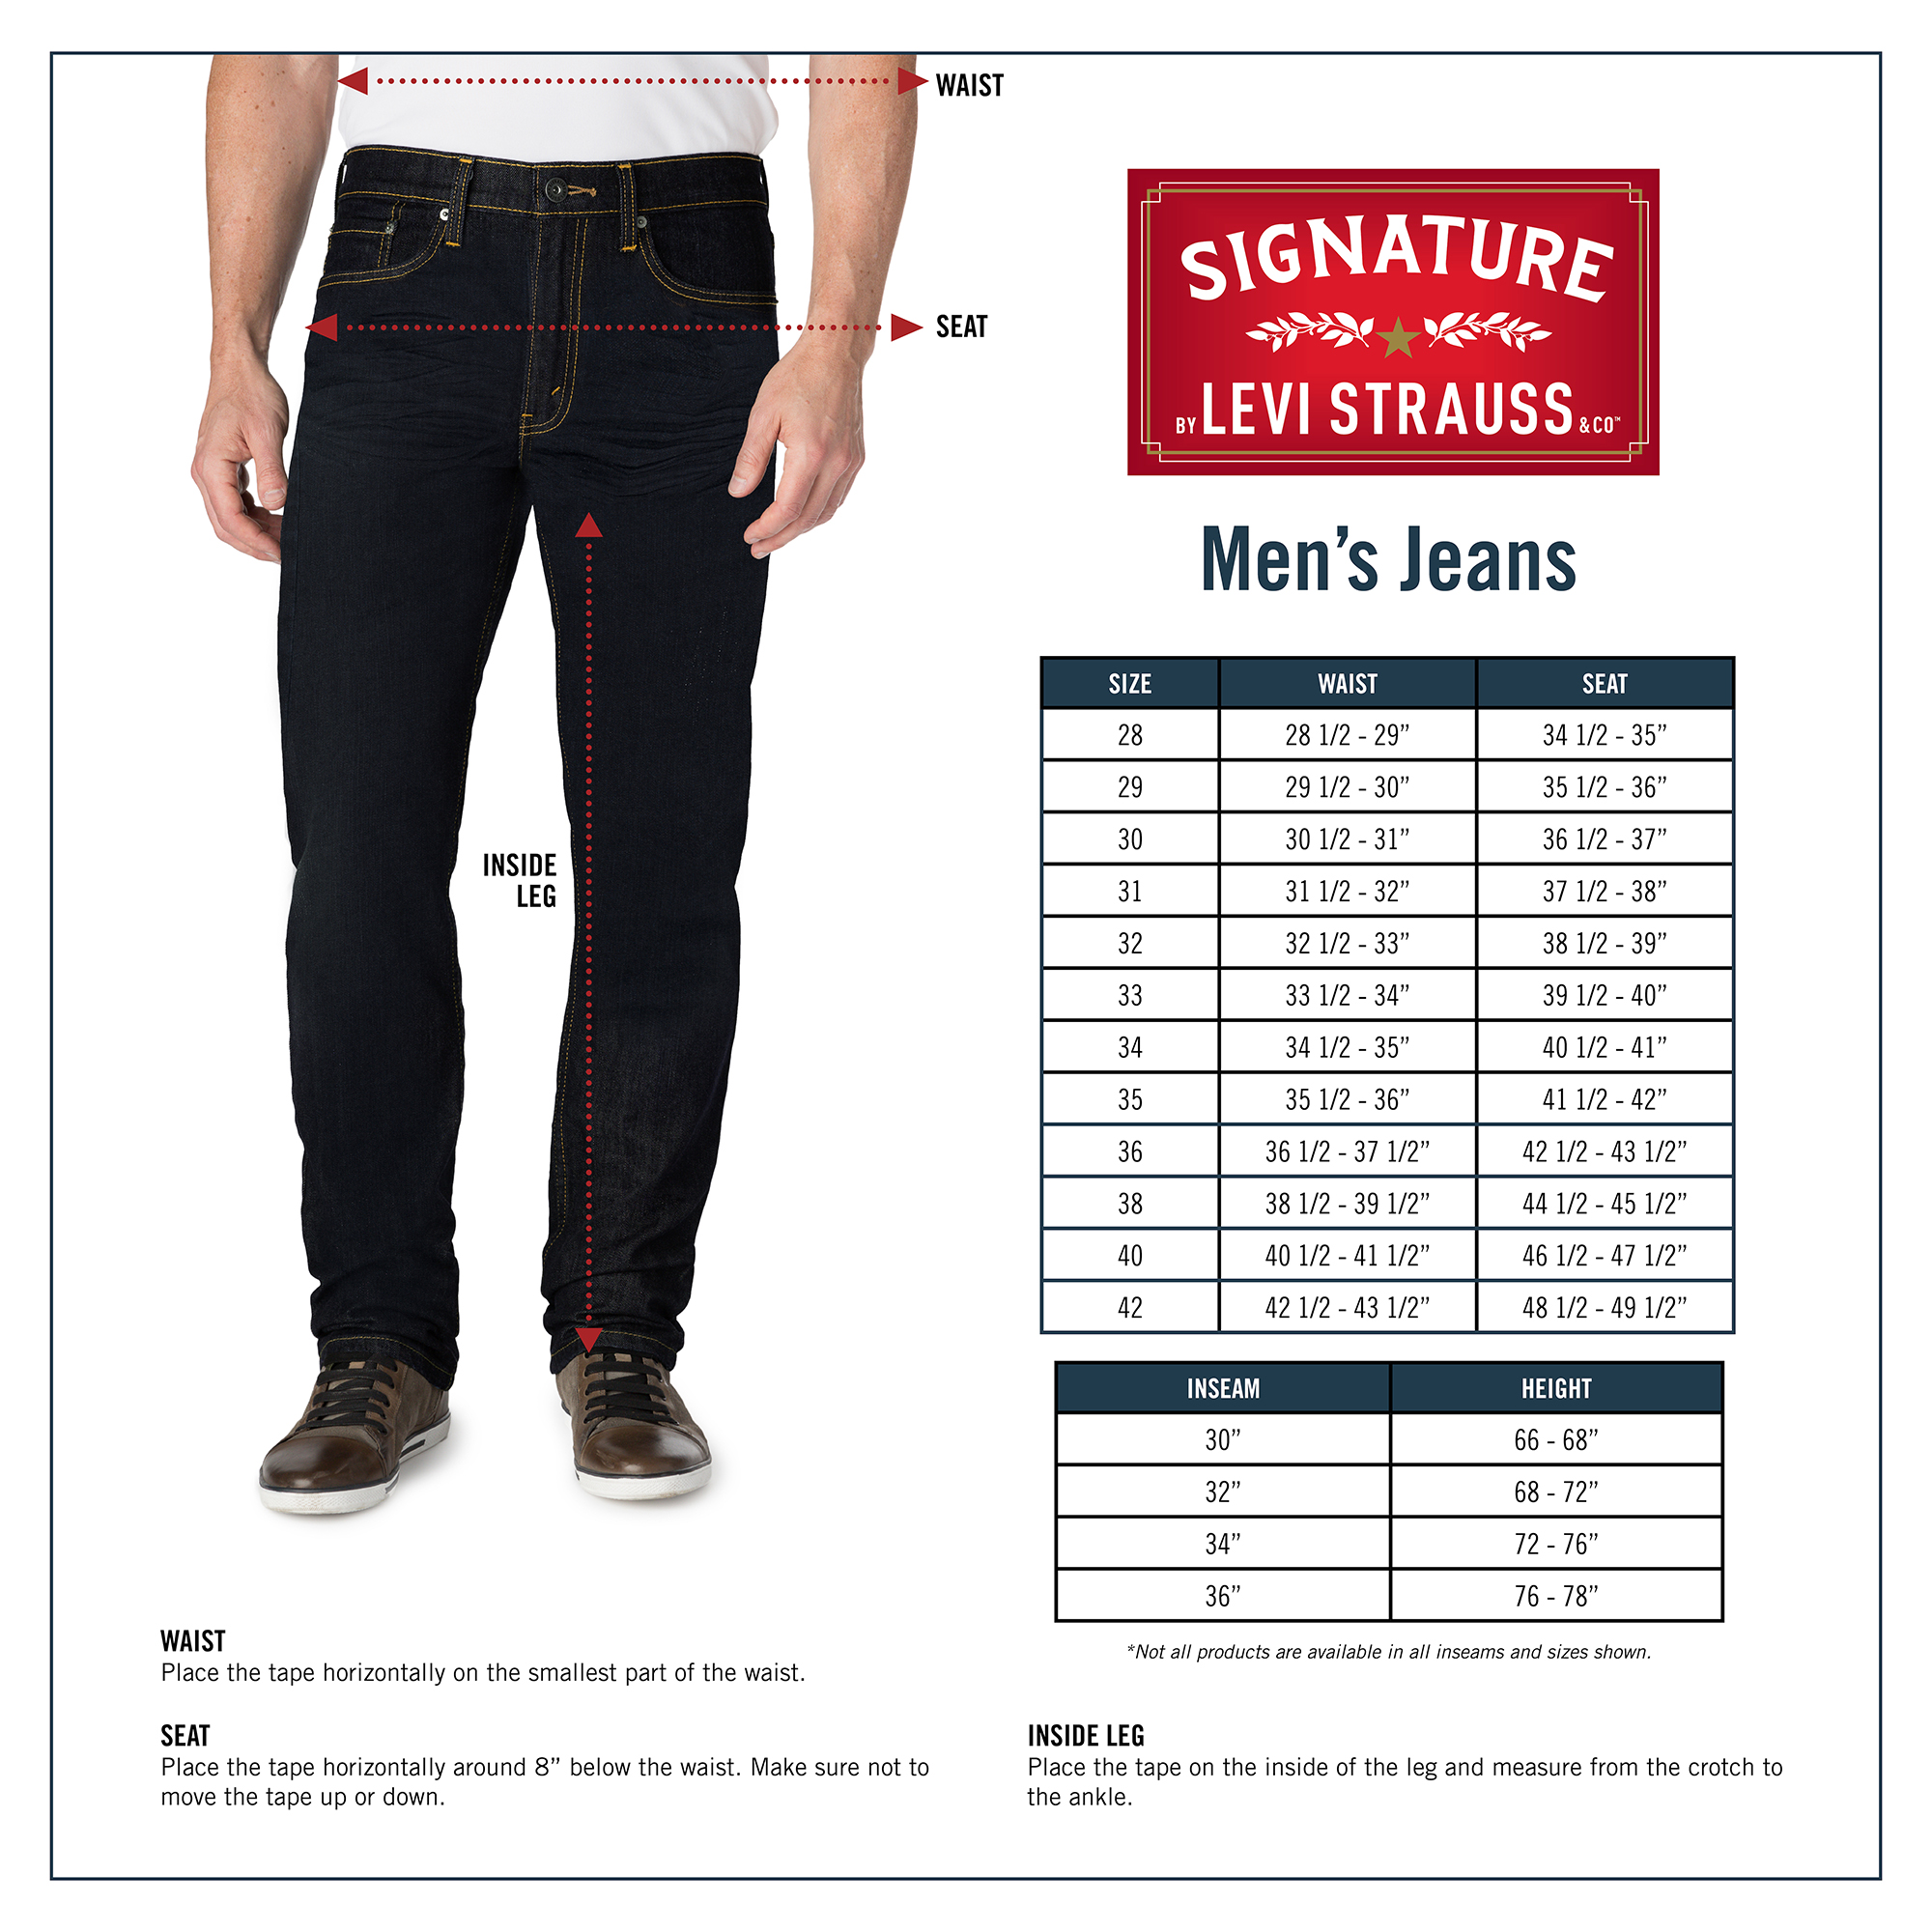 100% NEW Signature by Levi Strauss & Co. USAStock offers | GLOBAL STOCKS